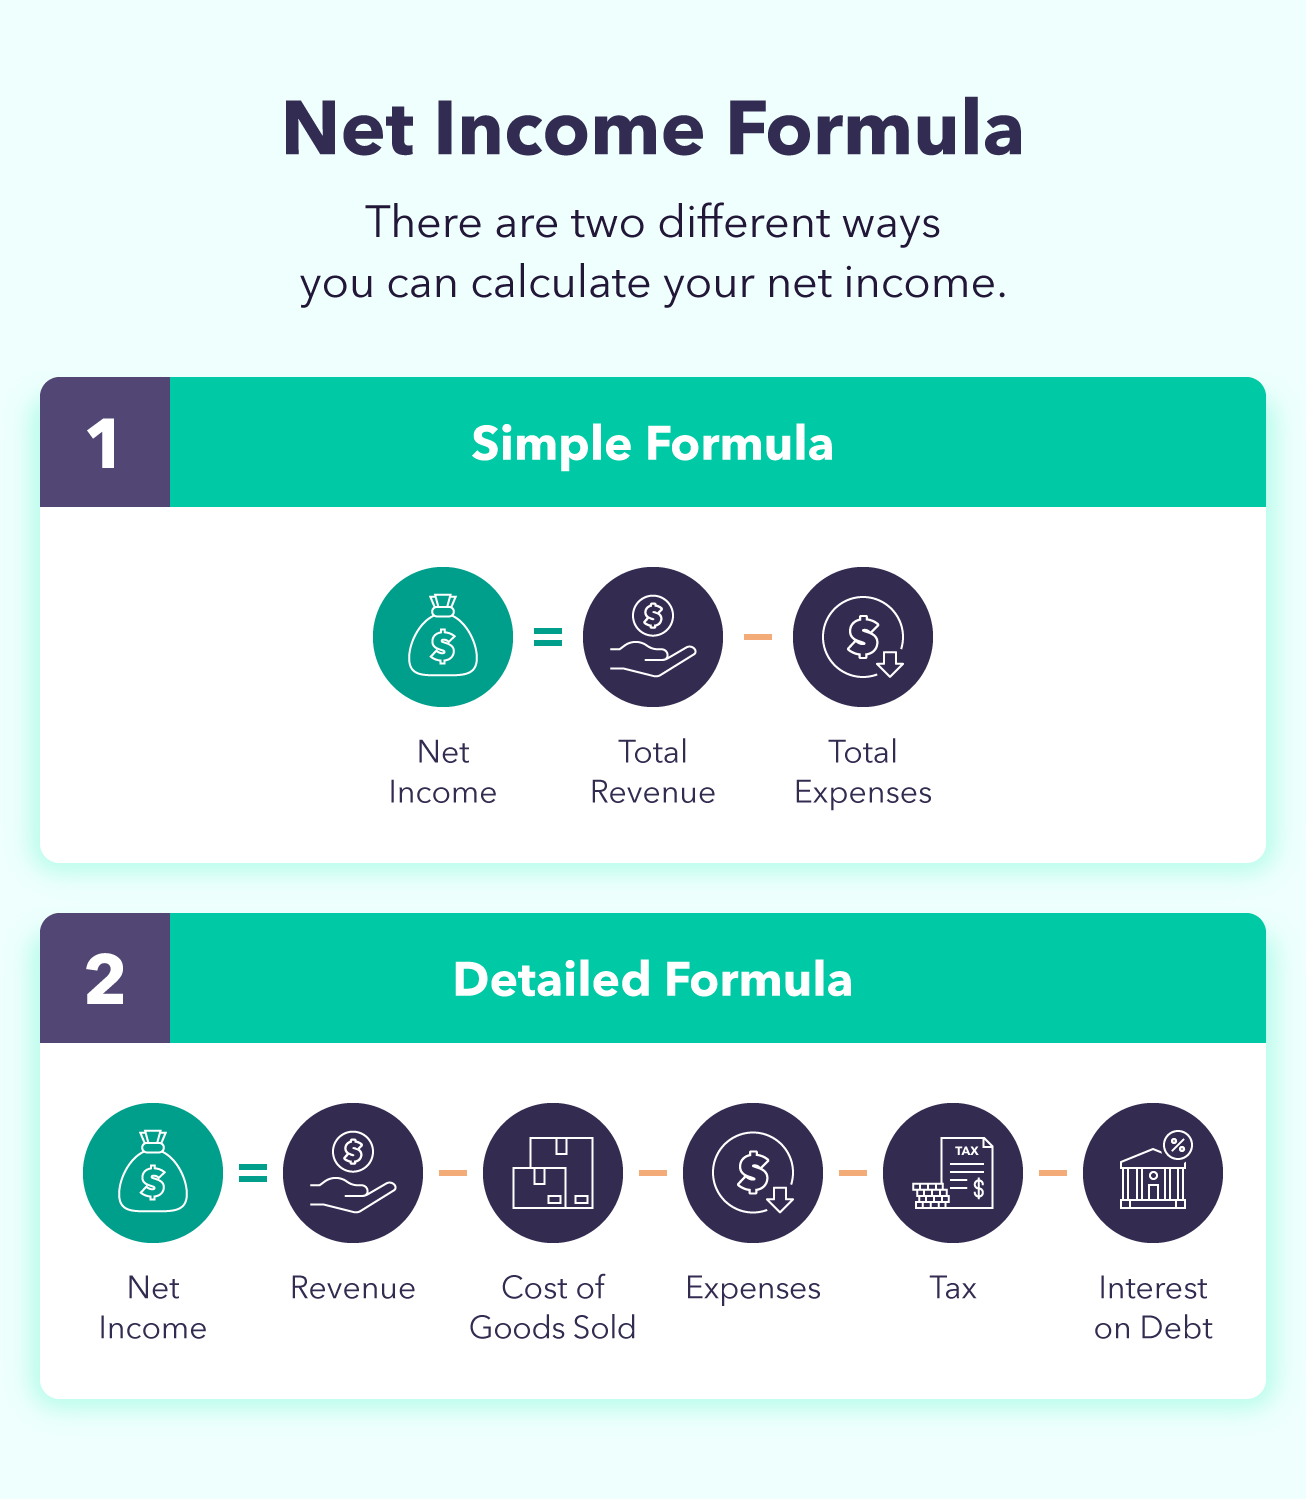 A graphic shows two different versions of the net income formula.